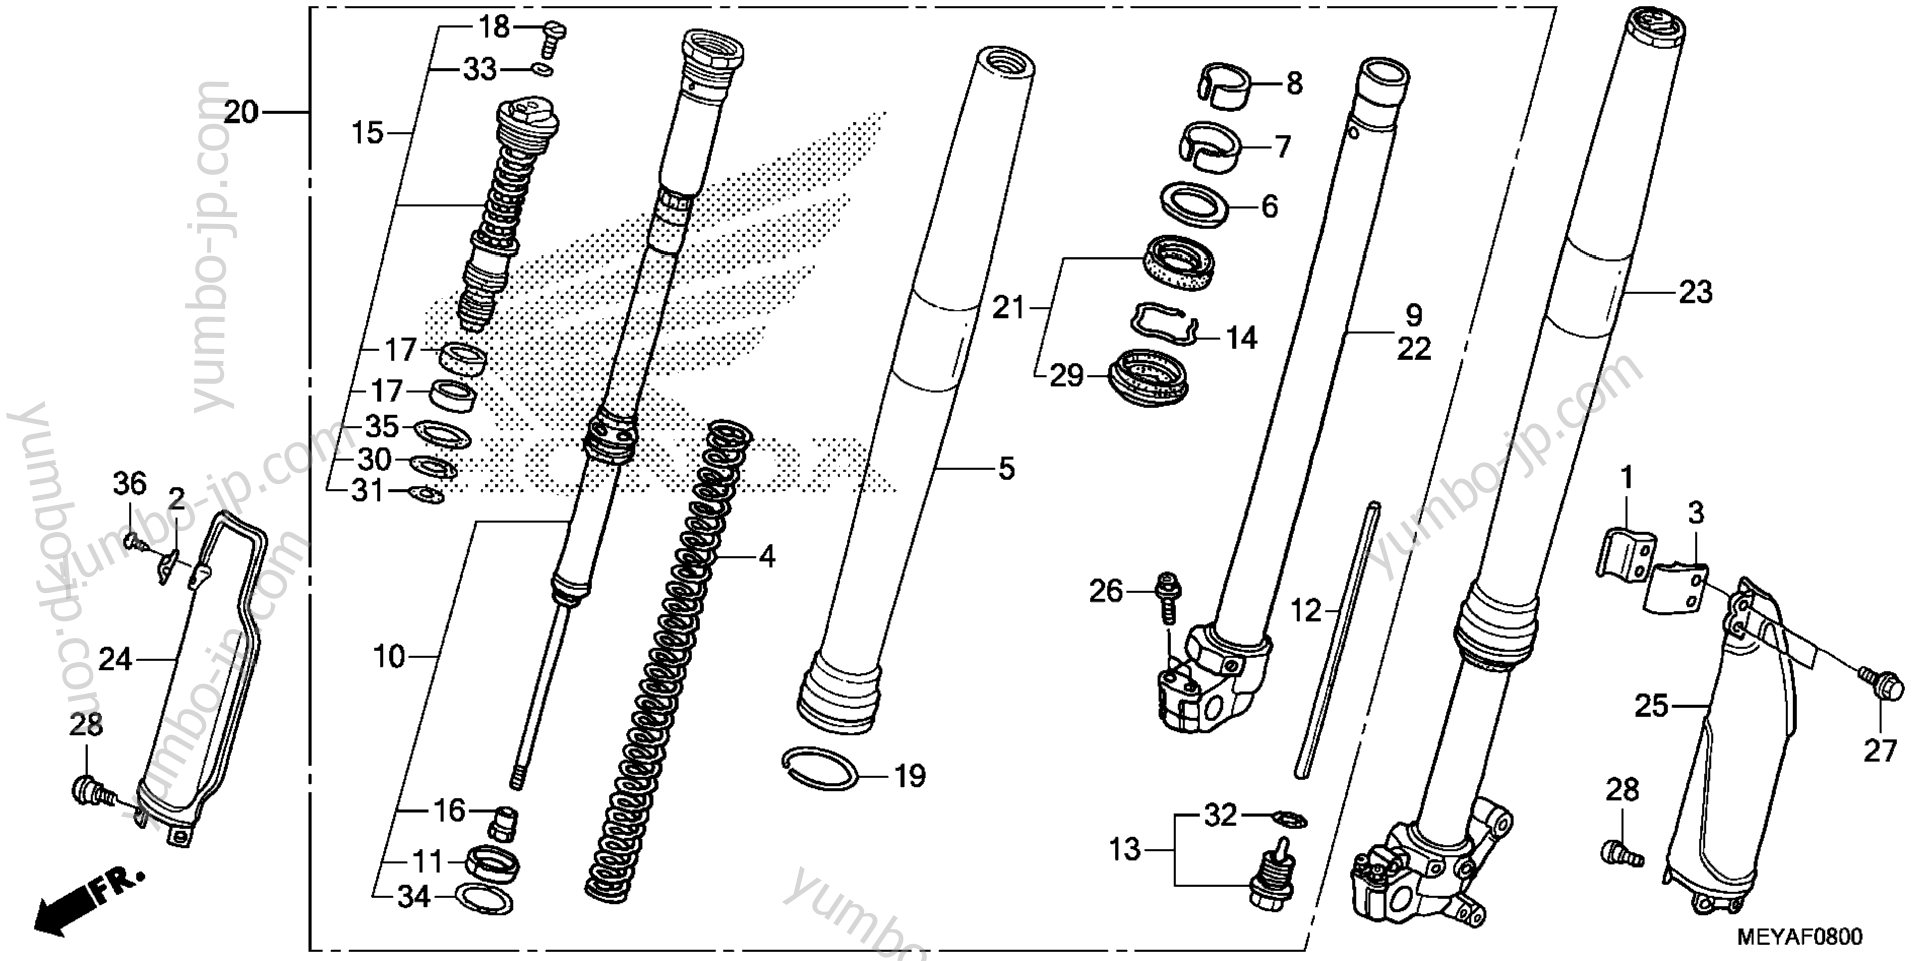 FRONT FORK for motorcycles HONDA CRF450X AC 2015 year